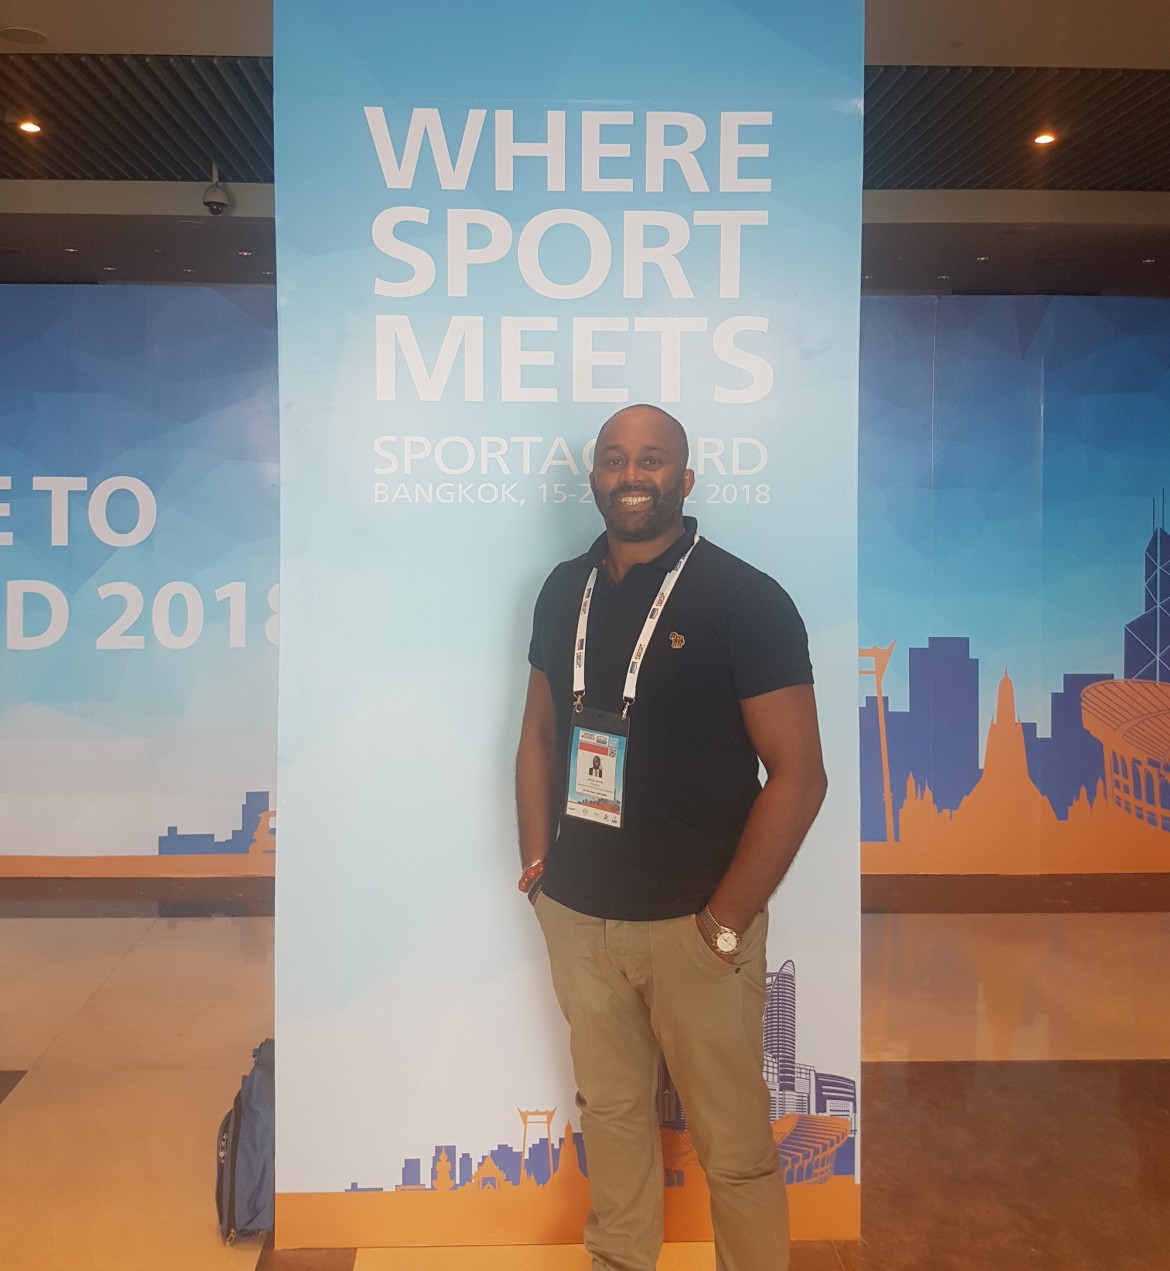 IMMAF ATTENDS SPORTACCORD 2018 TO WIN SUPPORT FOR RECOGNITION